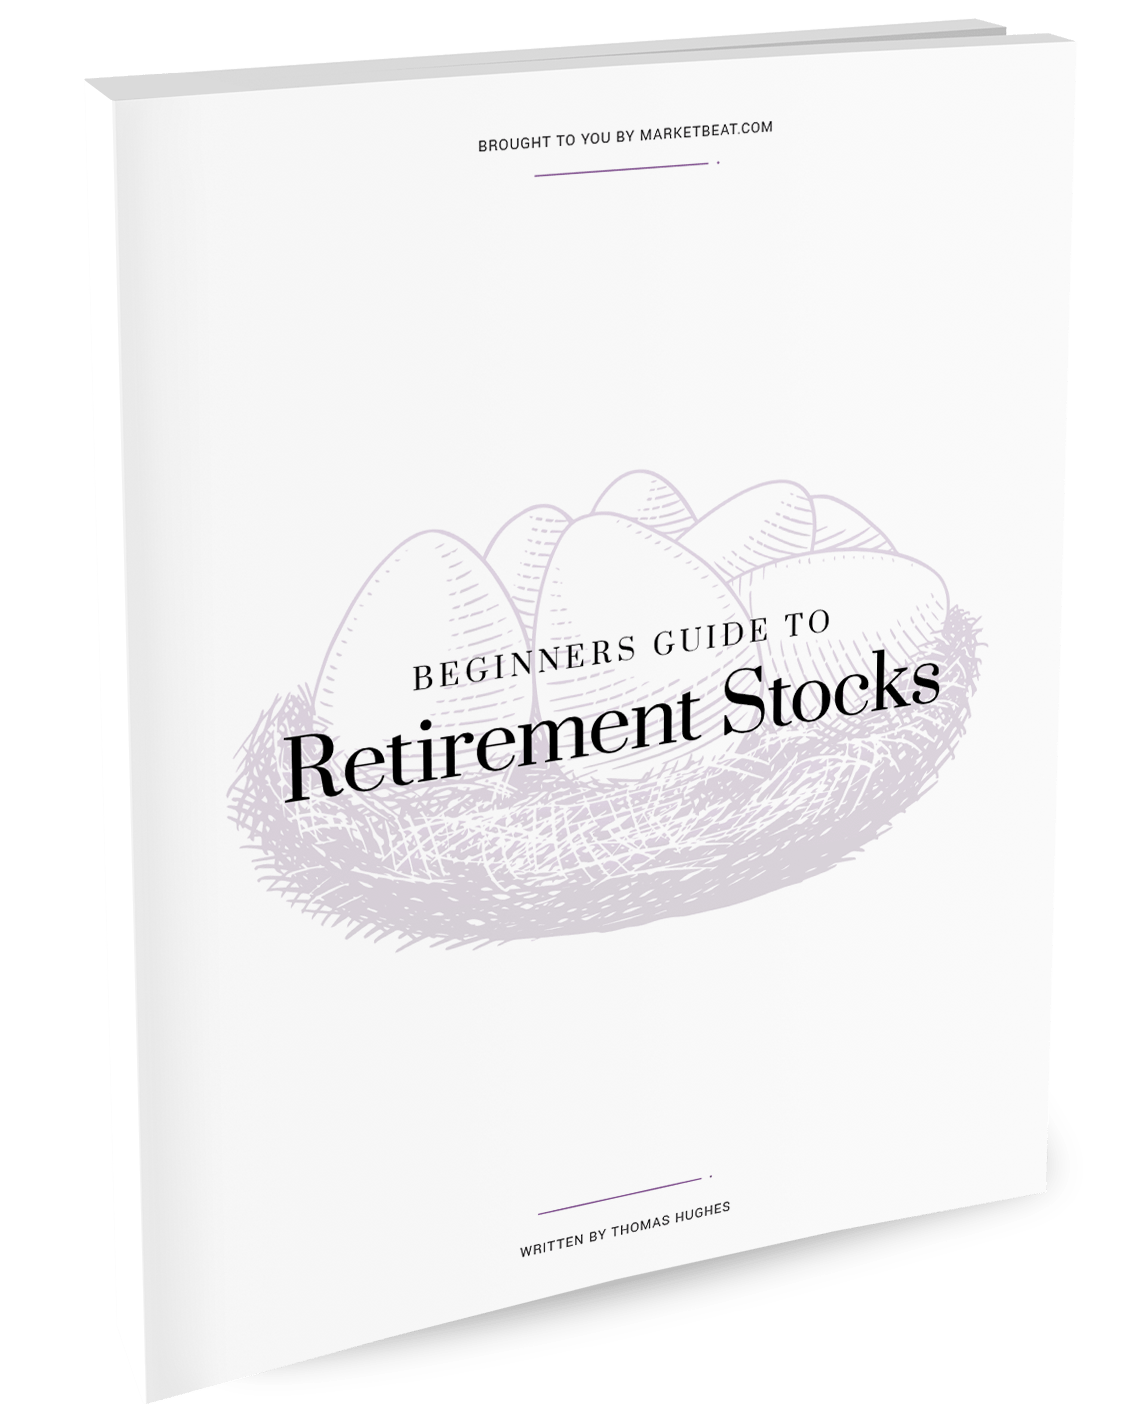 The Beginner's Guide to Retirement Stock Covers